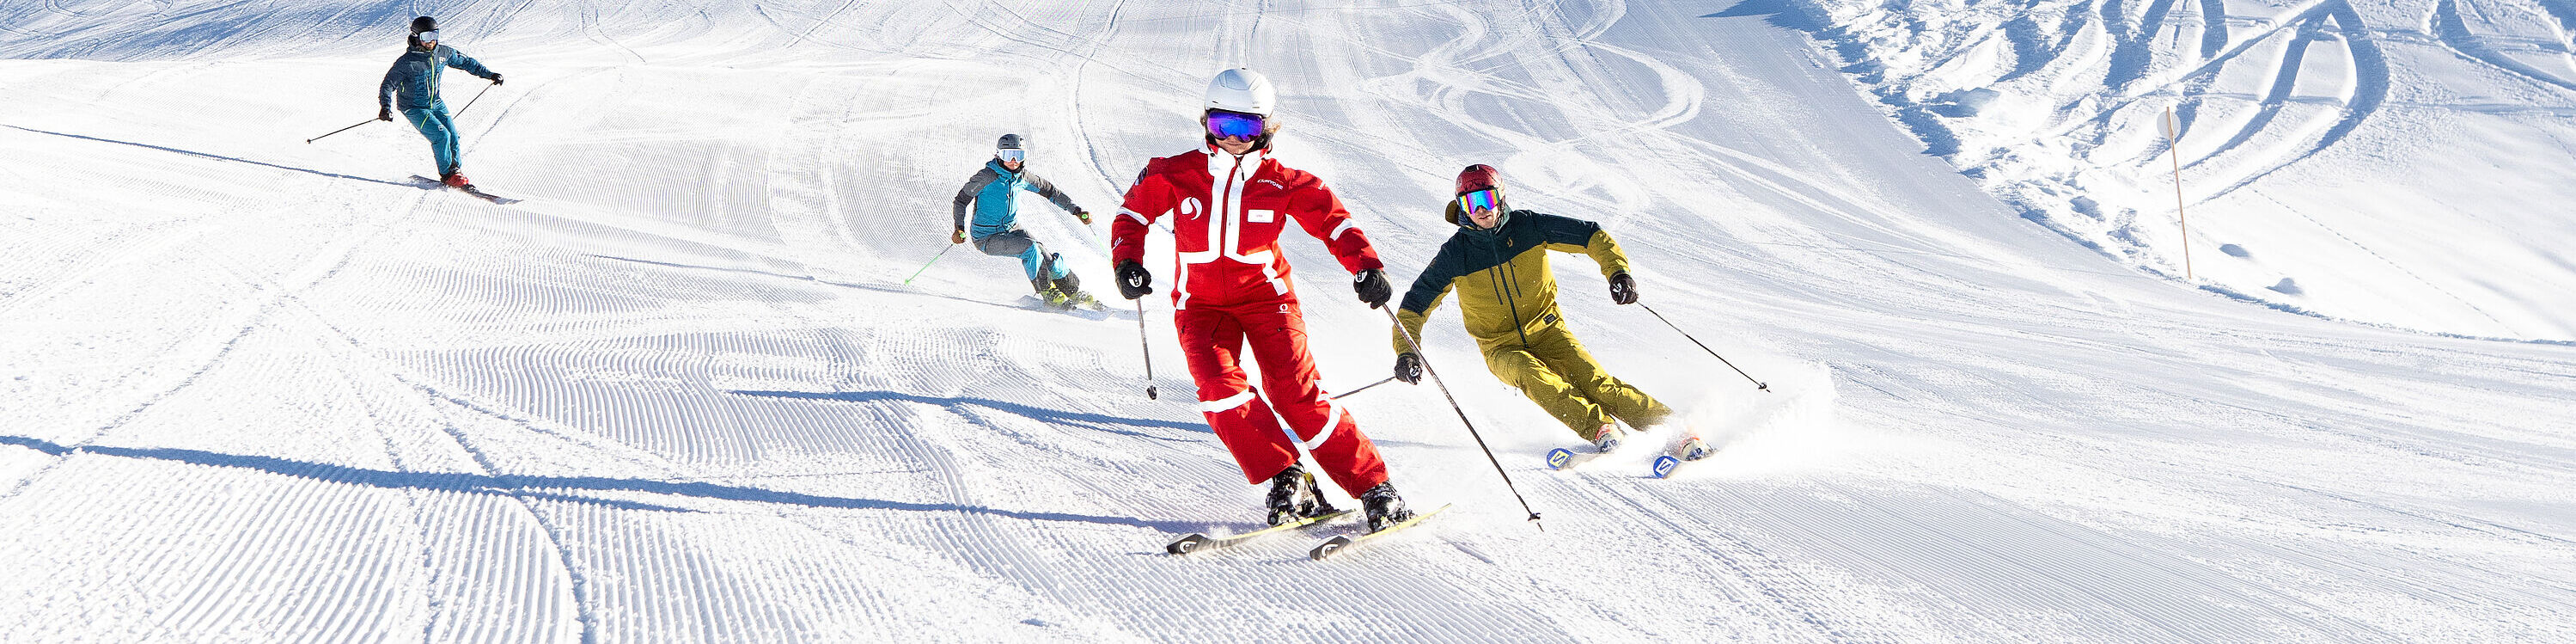 An advanced ski group is following their ski instructor, making easy turns